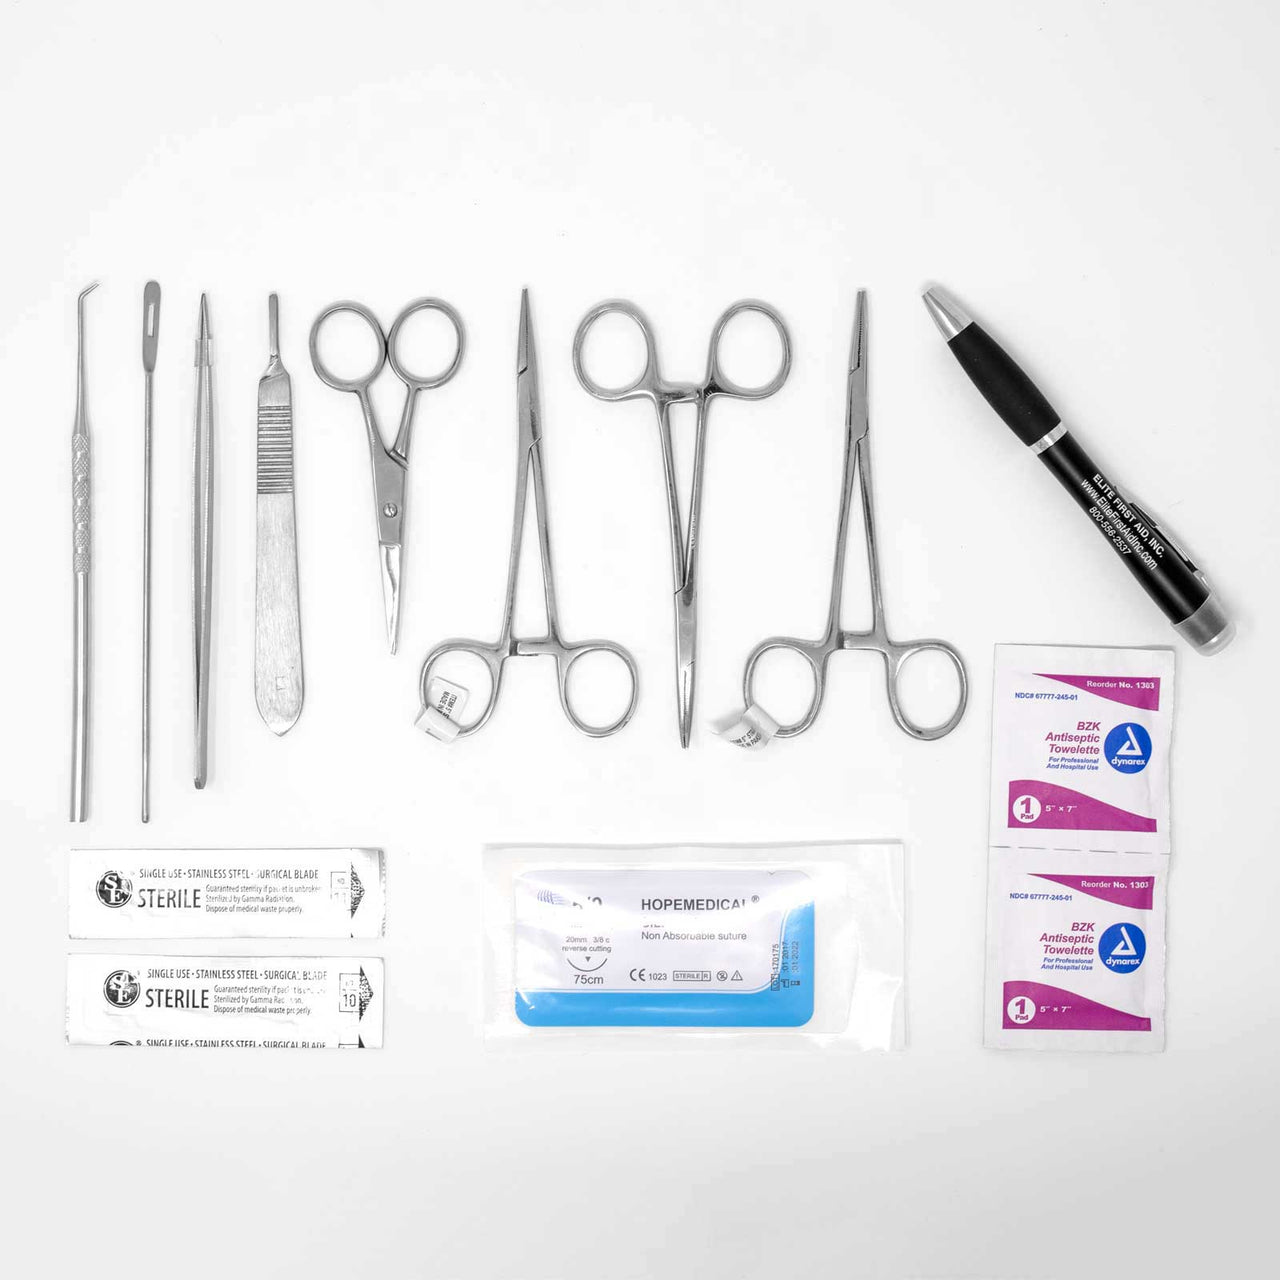 Stainless Steel Surgical Set